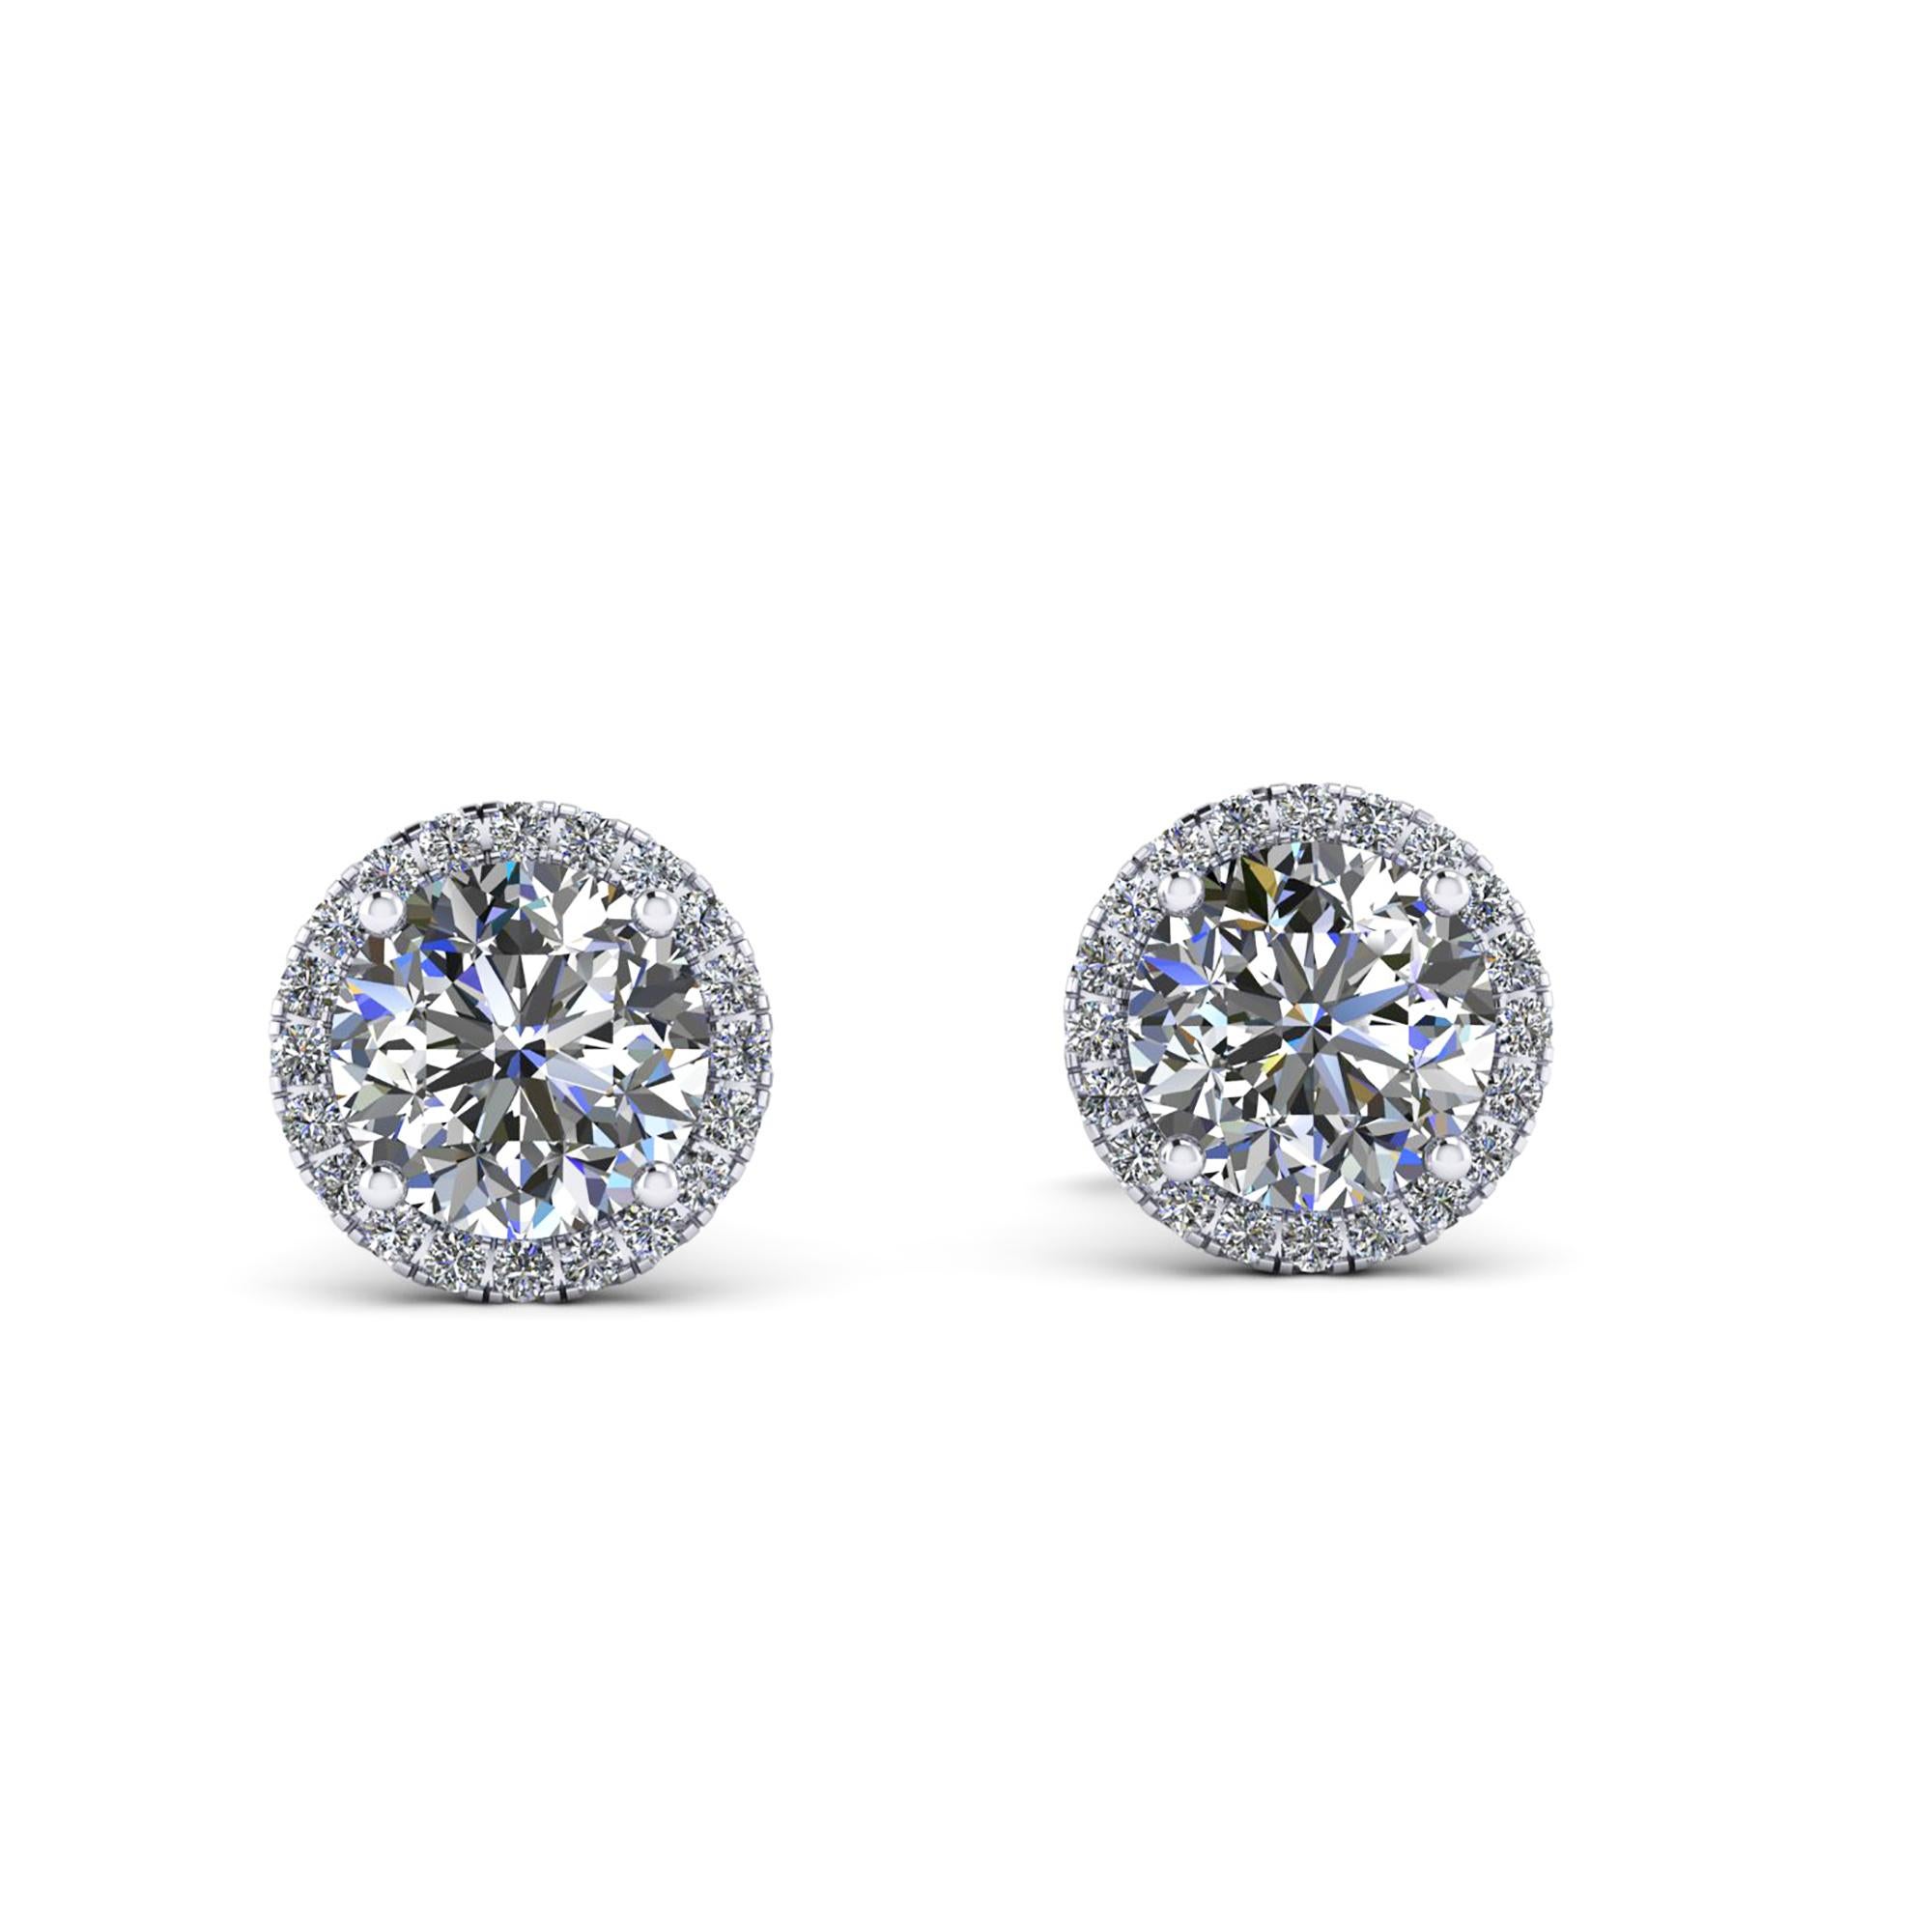 GIA Certified 2.02 Carat Diamond Halo Studs earrings hand made in Platinum in New York City with the best Italian craftsmanship
two brilliant round diamonds, H color, VS clarity of 1.01 carat and 1.01 carat, the diamond halos enhancing the diamonds